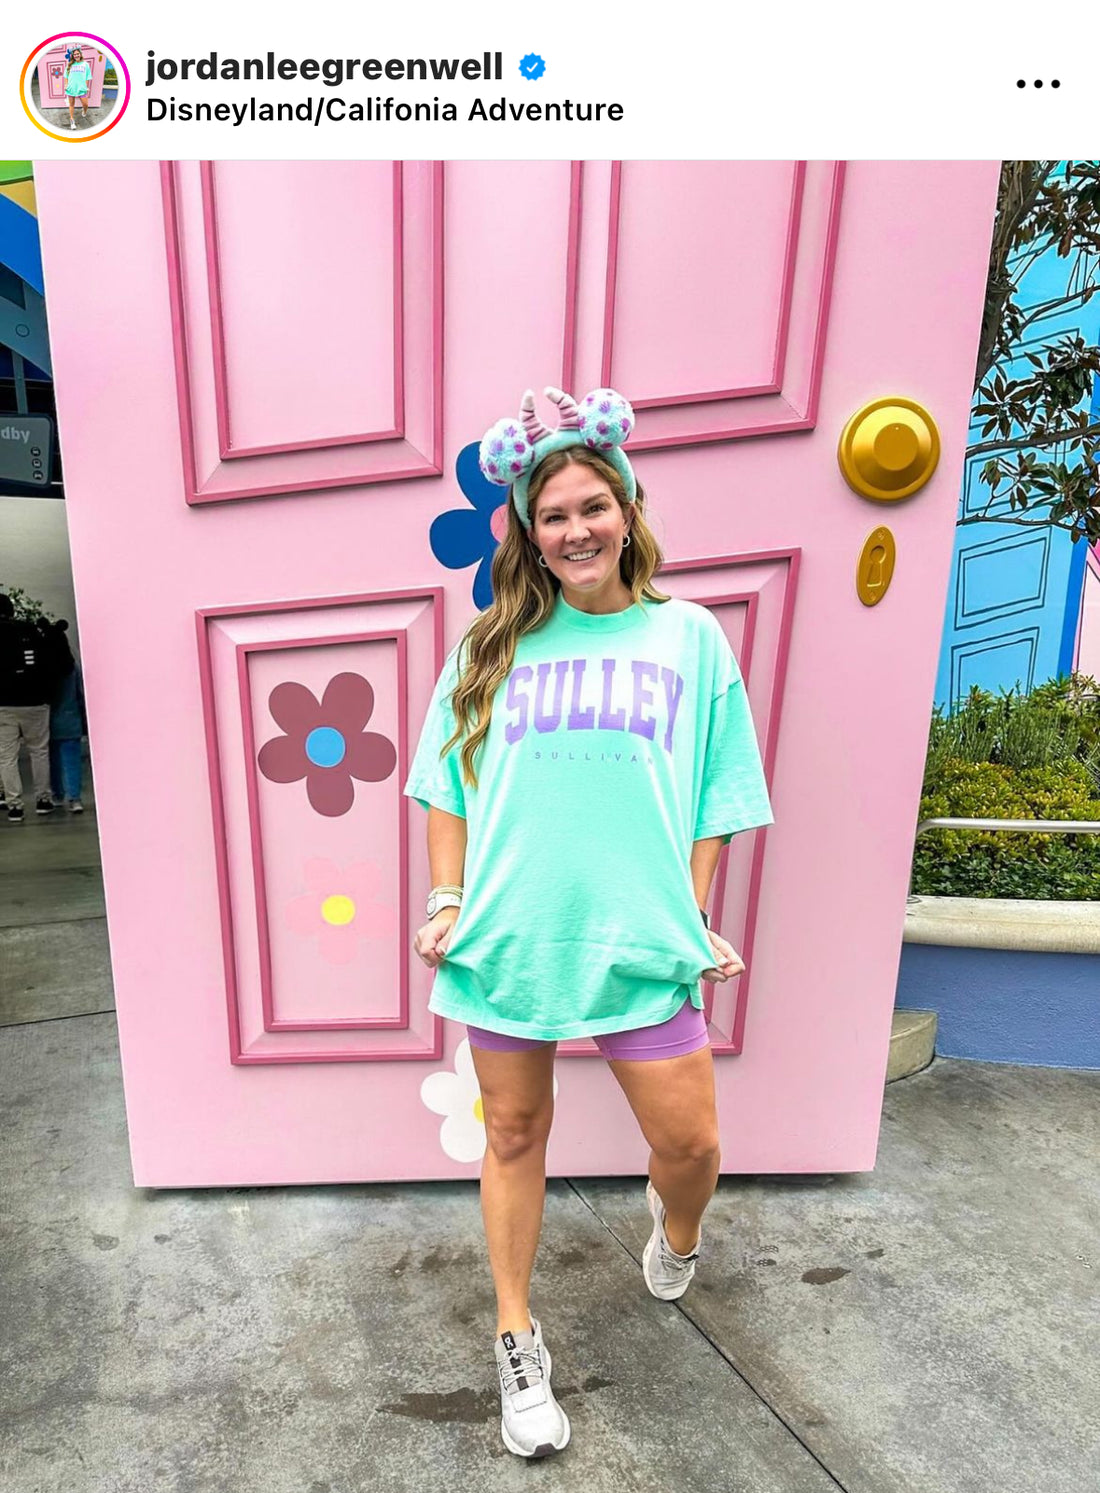 💜 NEW PUFF INK Sulley University Oversized Tee